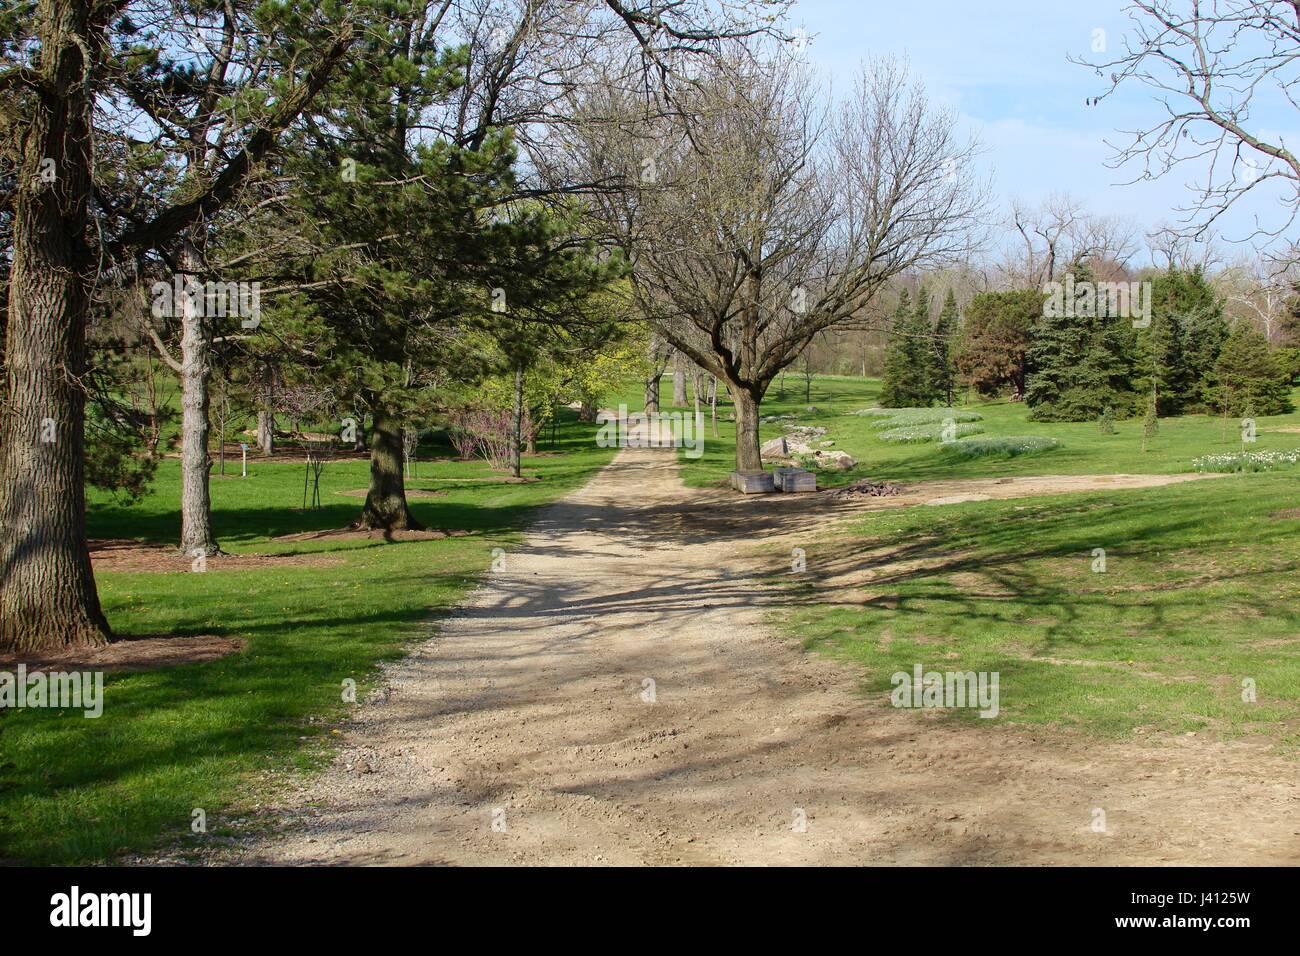 A beautiful spring day exploring the beauty of nature in the park. Stock Photo